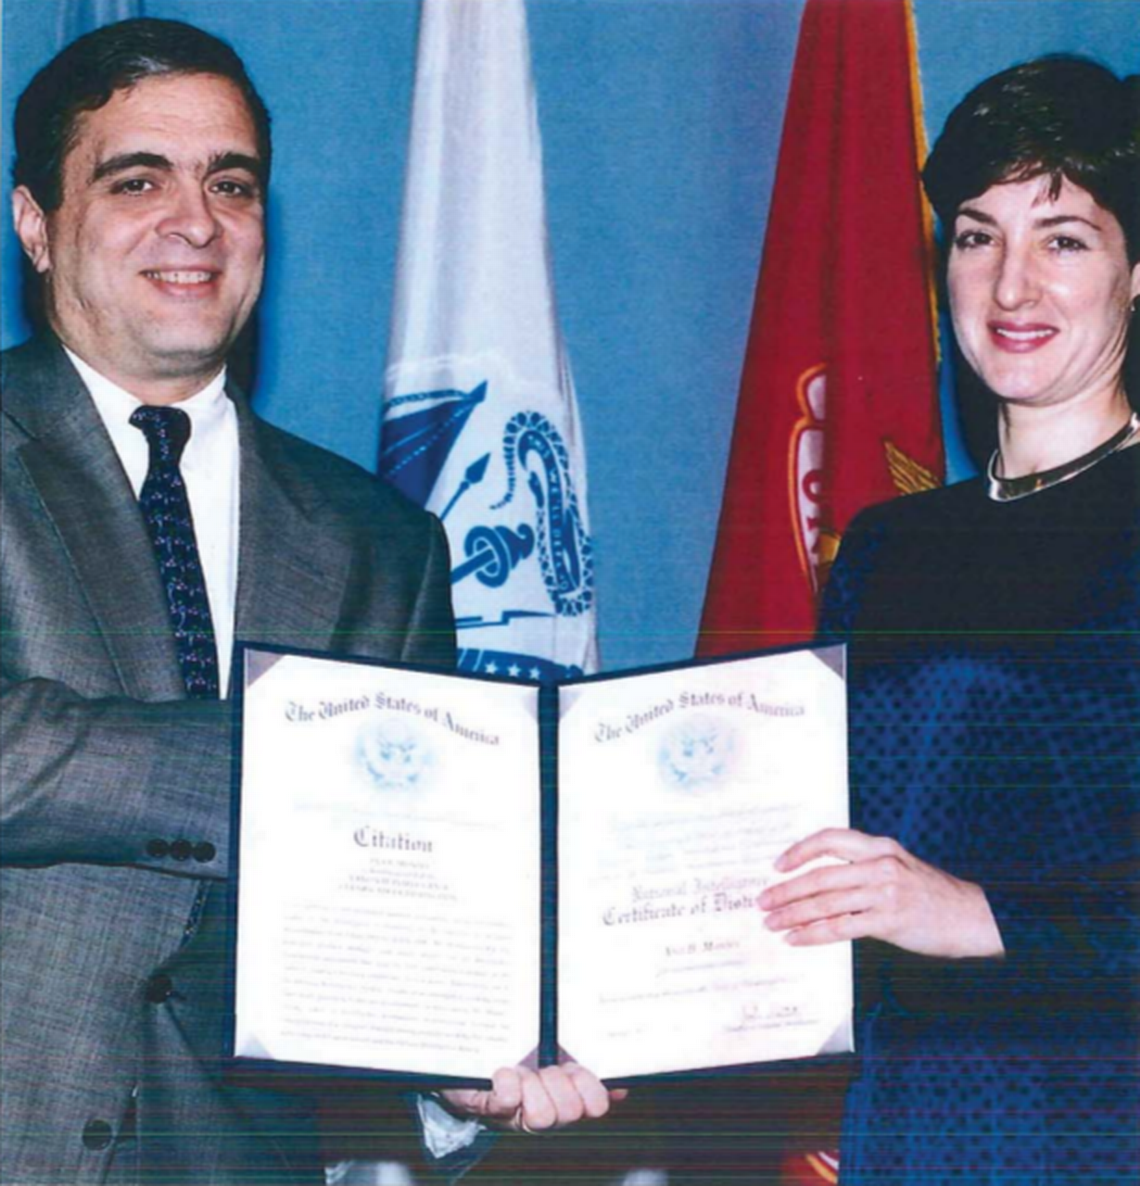 Ana Belén Montes receives the National Intelligence Certificate of Distinction from then-deputy Director of Central Intelligence George Tenet on 21 February 1997.